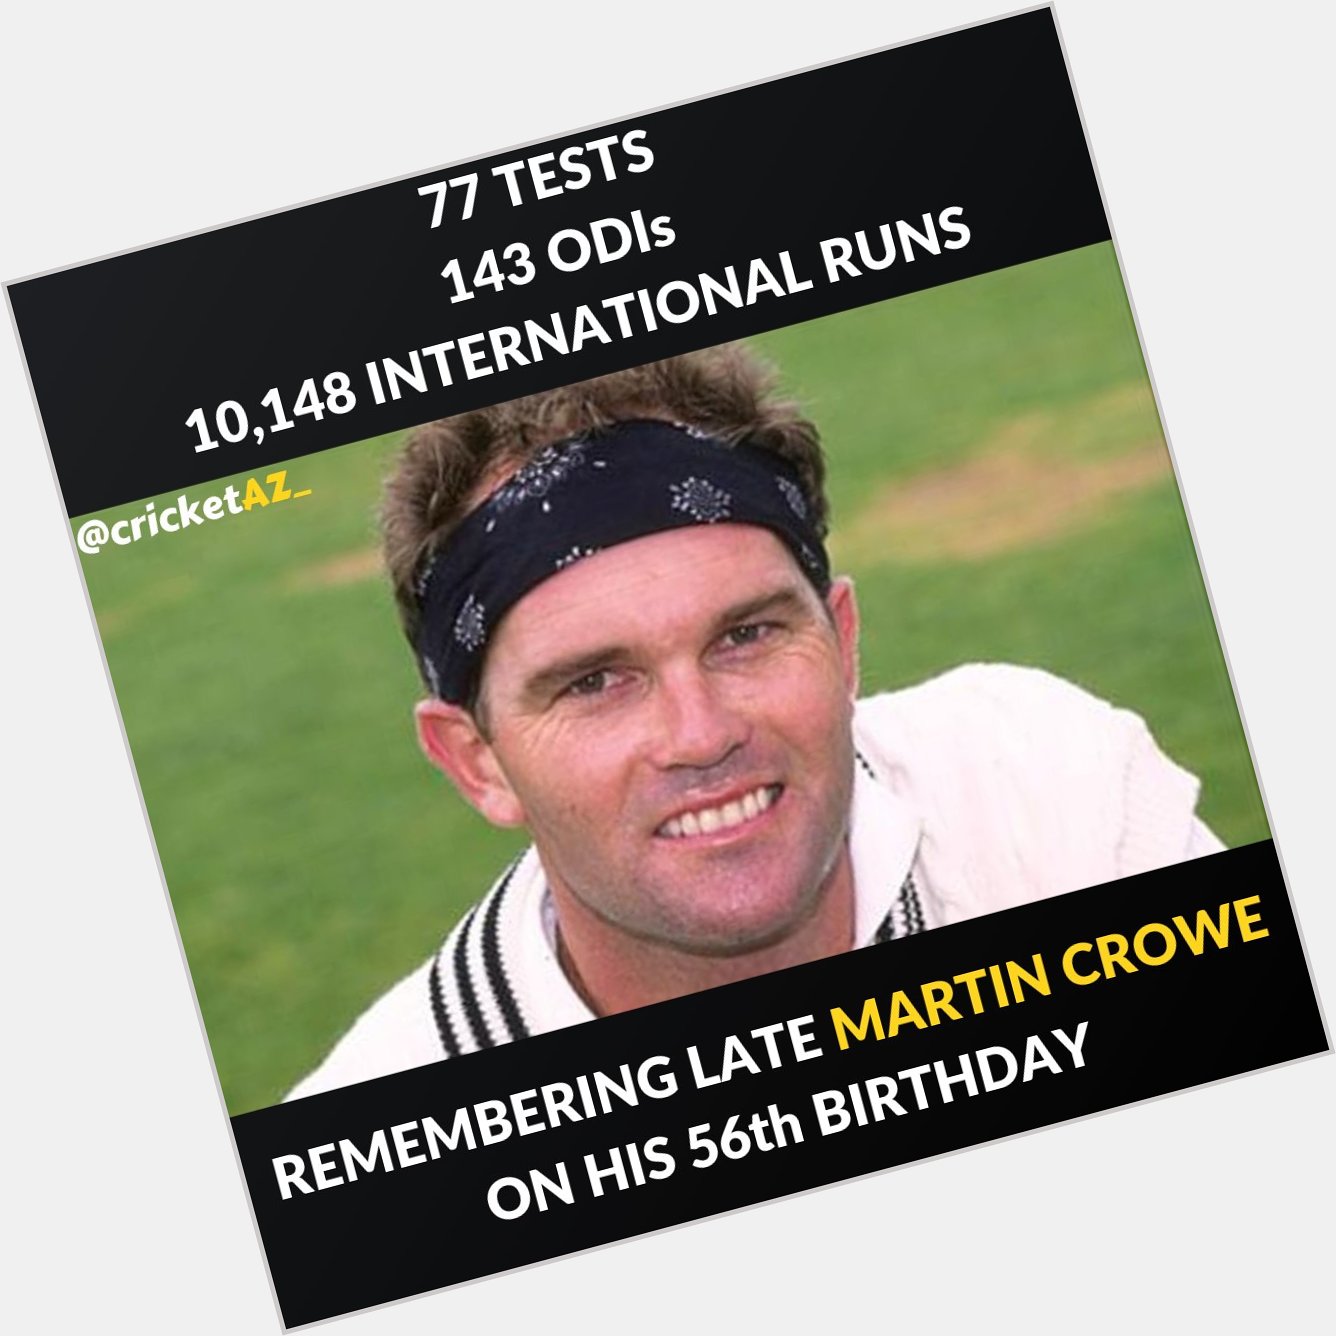 A day to celebrate the life of Late Martin Crowe.
Here\s wishing him a Happy Birthday 